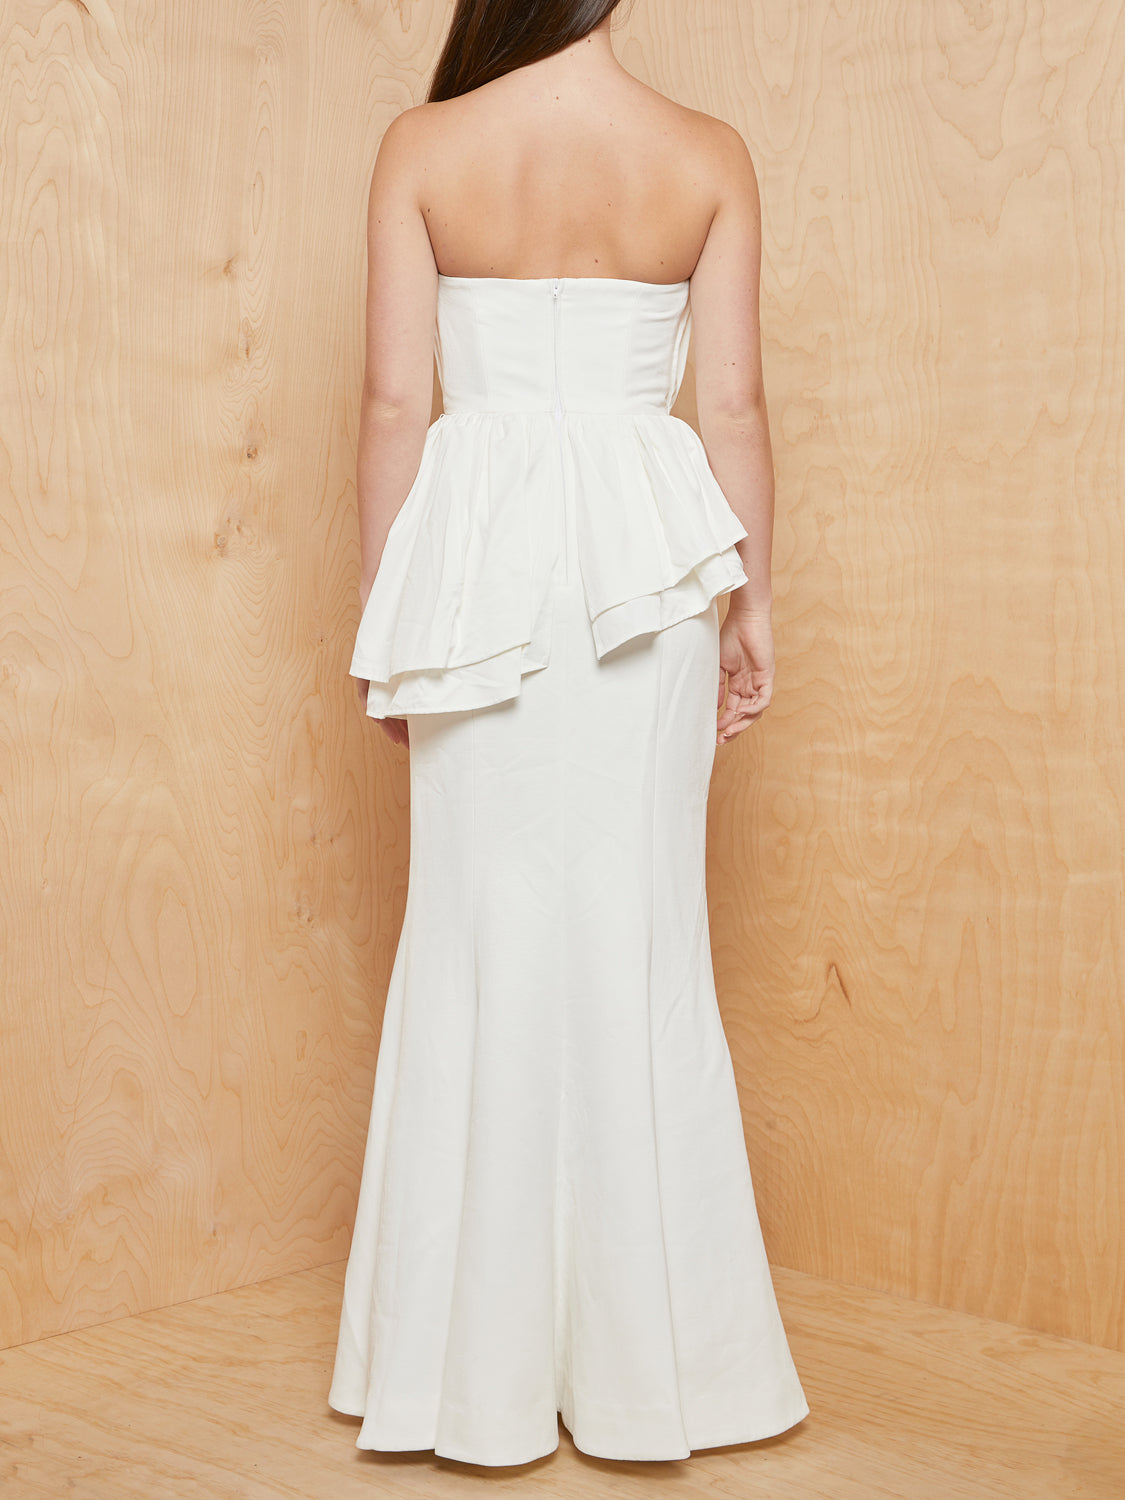 CM/EO Collective Ivory Silenced Gown